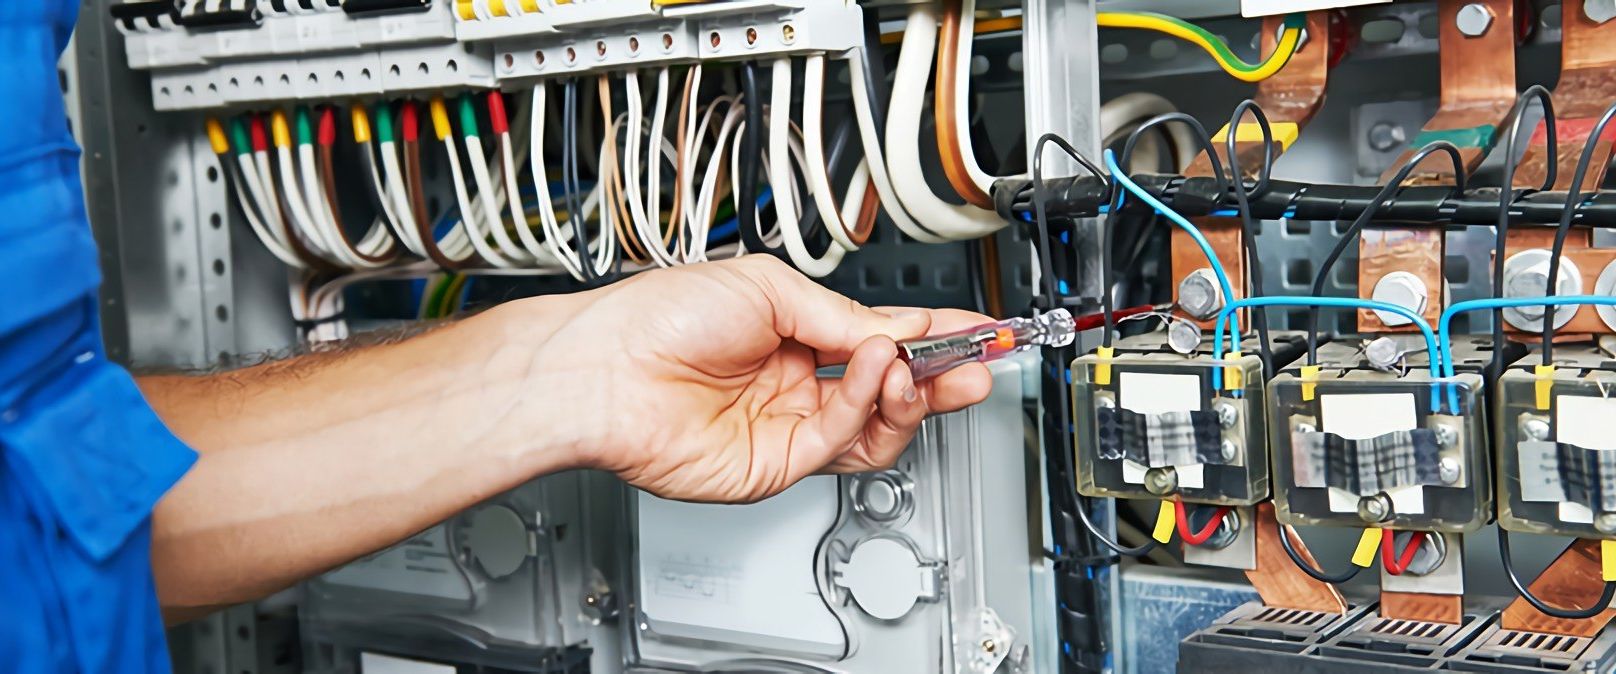 Only Qualified Electricians Should Fix Electrical Problems in Winter